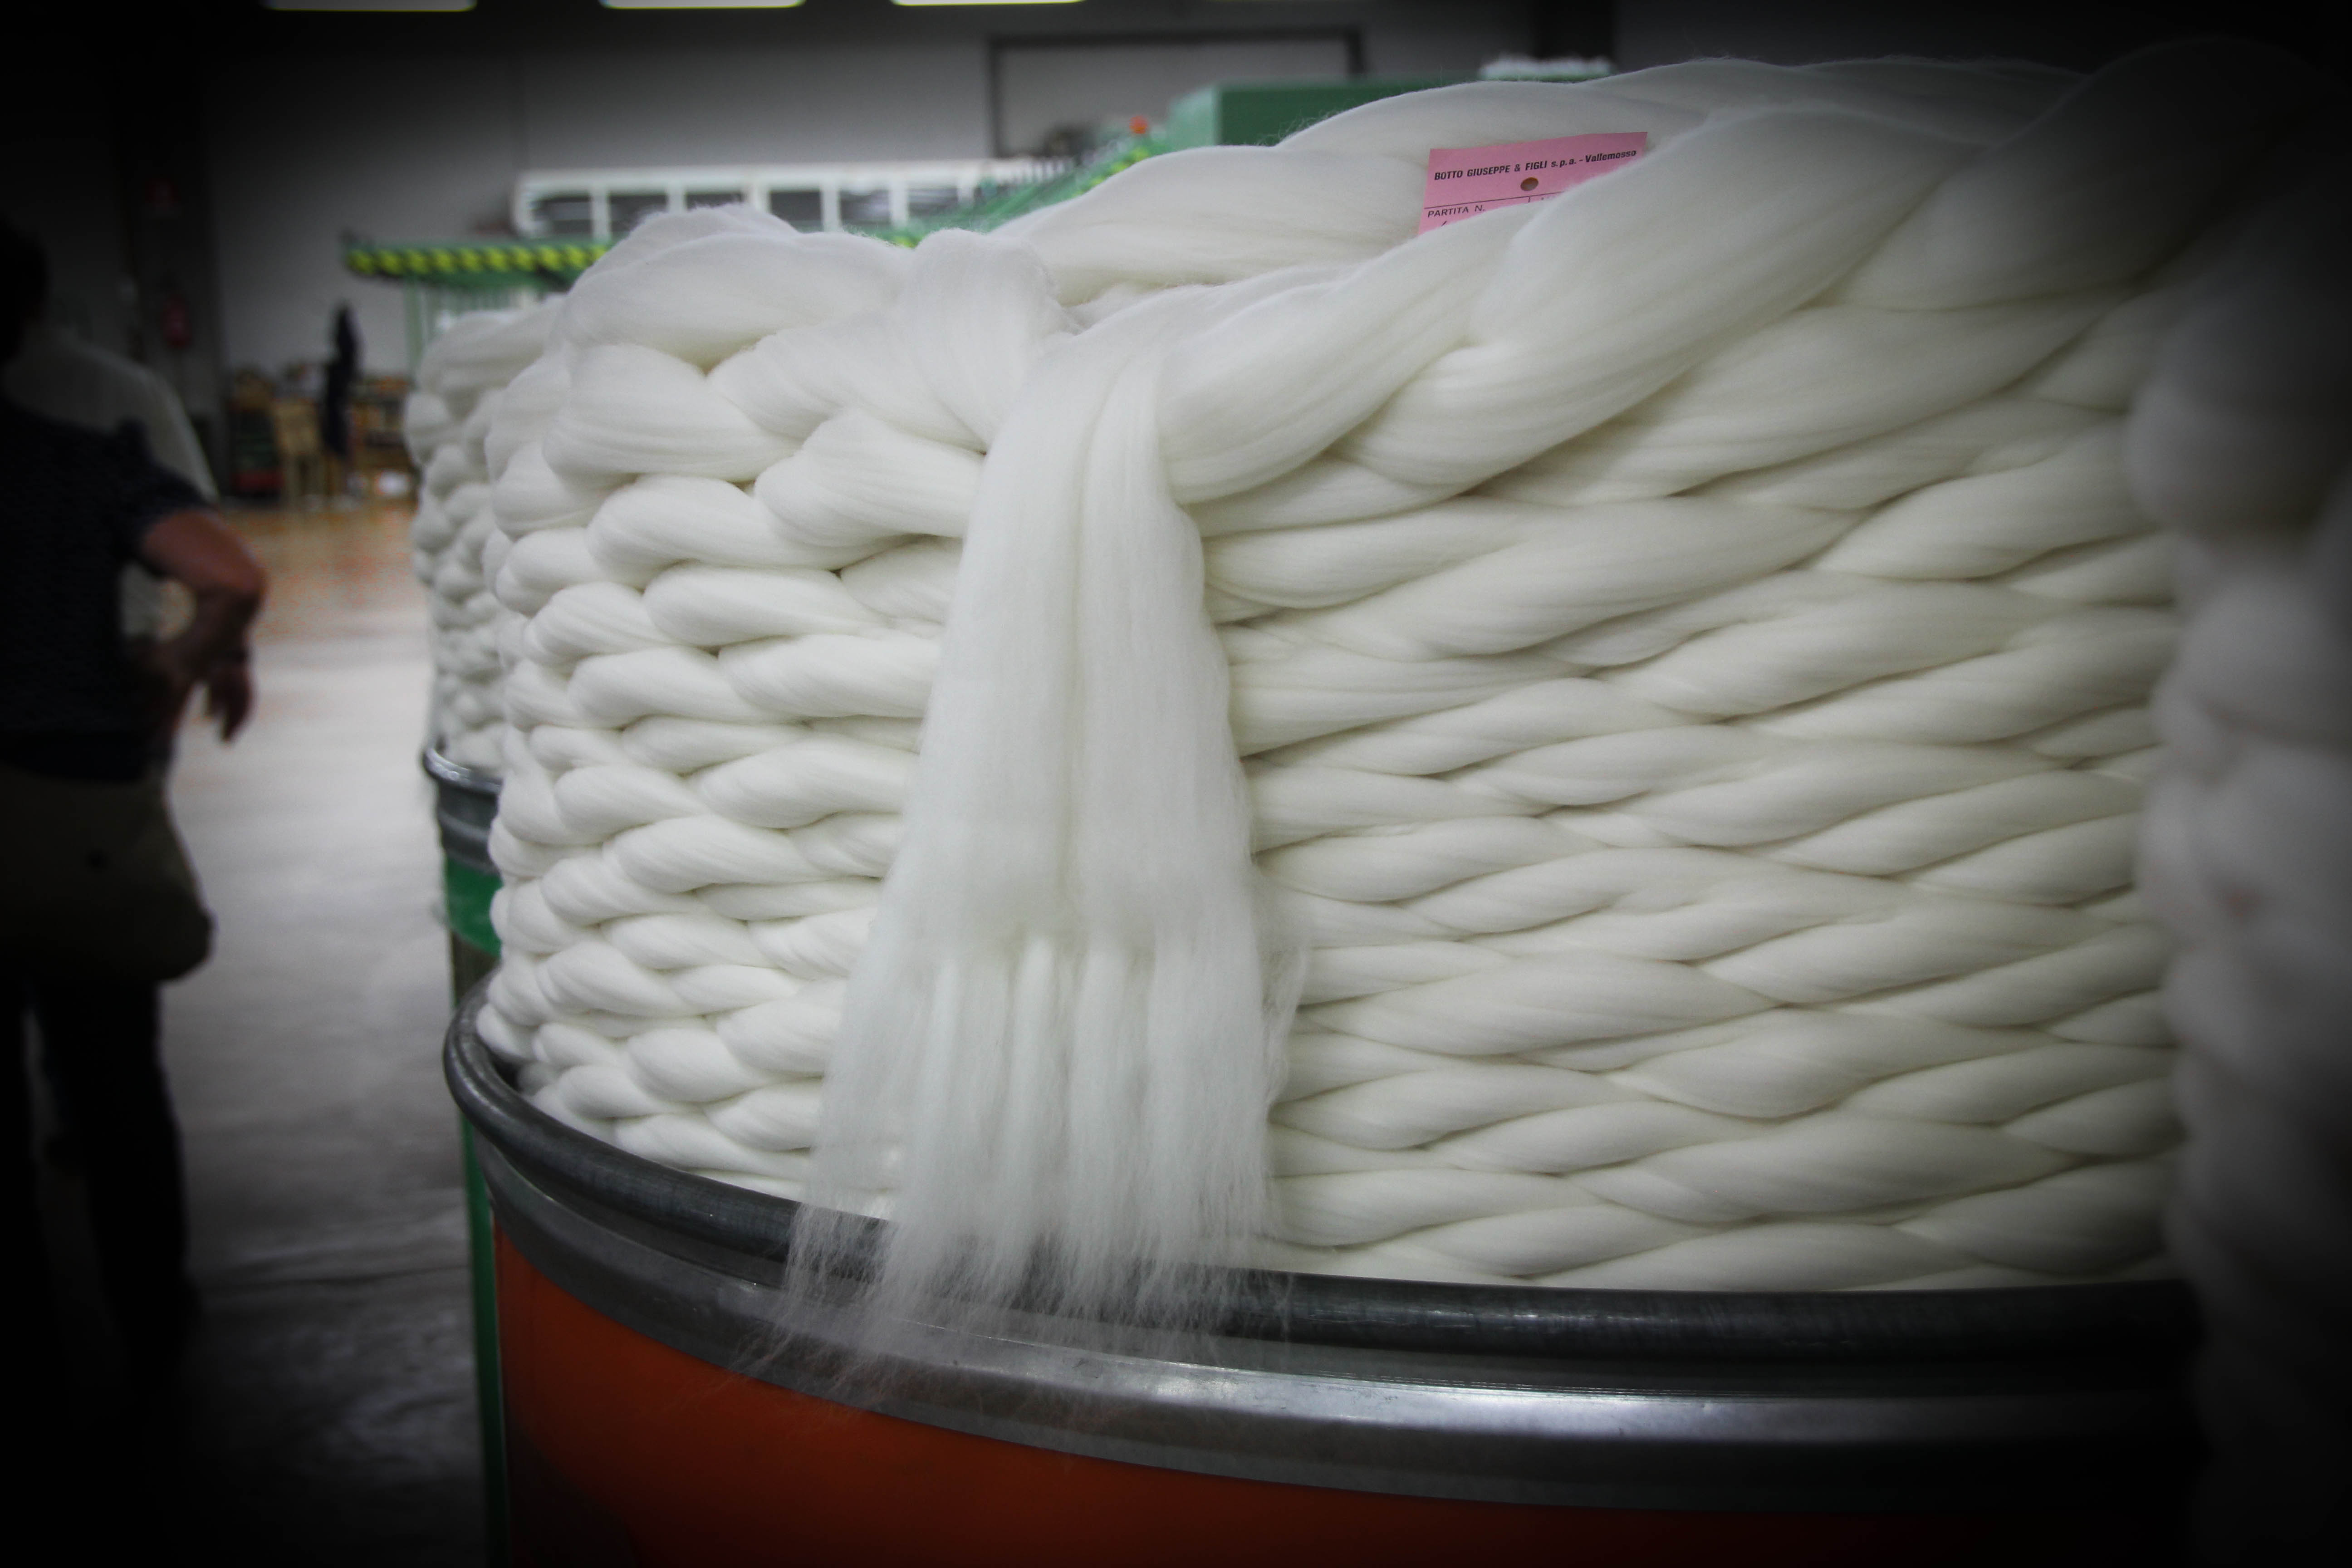 The wool is then processed and made into many different quality products